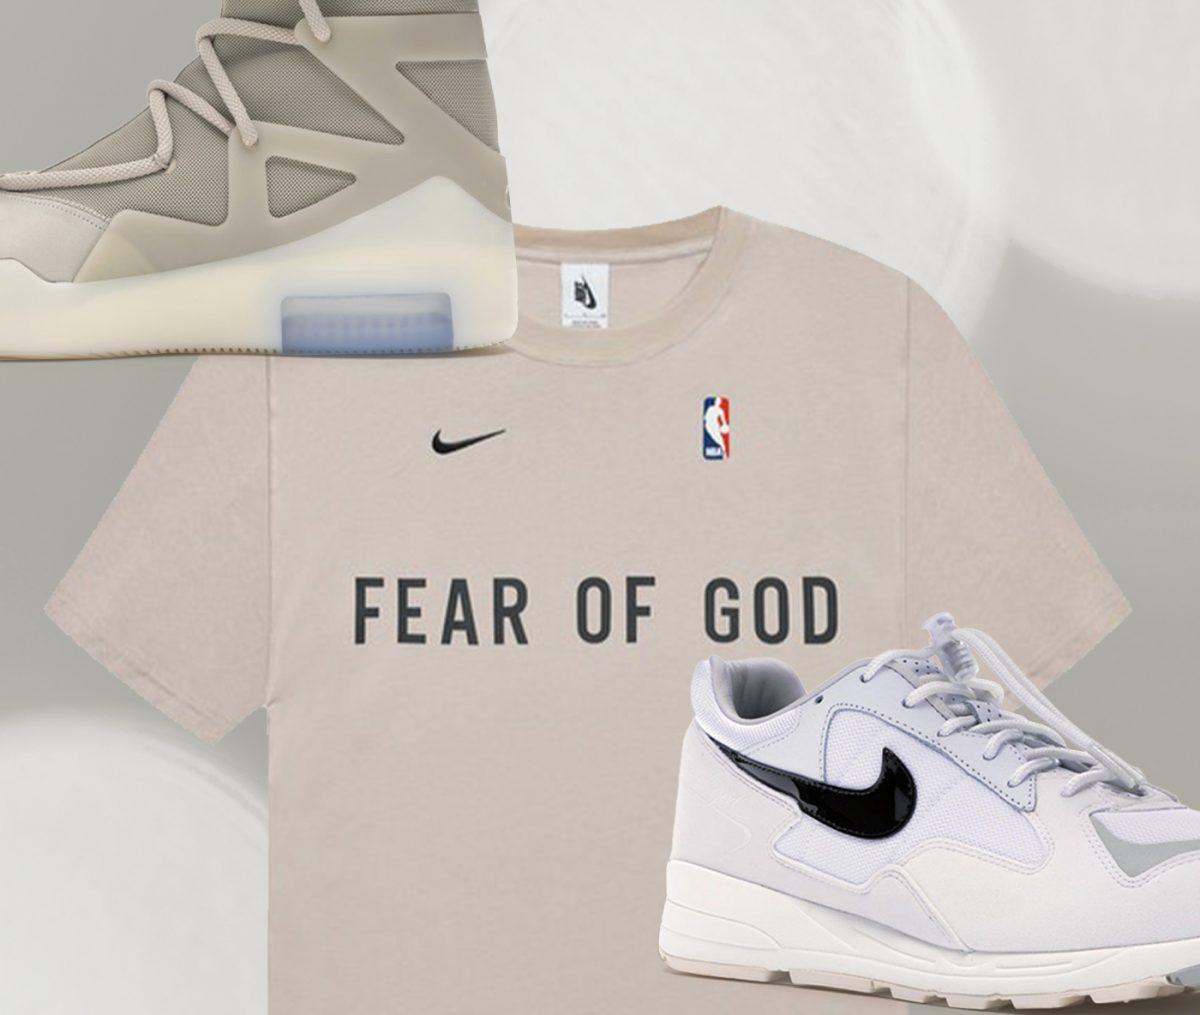 Jerry Lorenzo's Nike Air Fear of God Collaboration, an Exclusive Look 